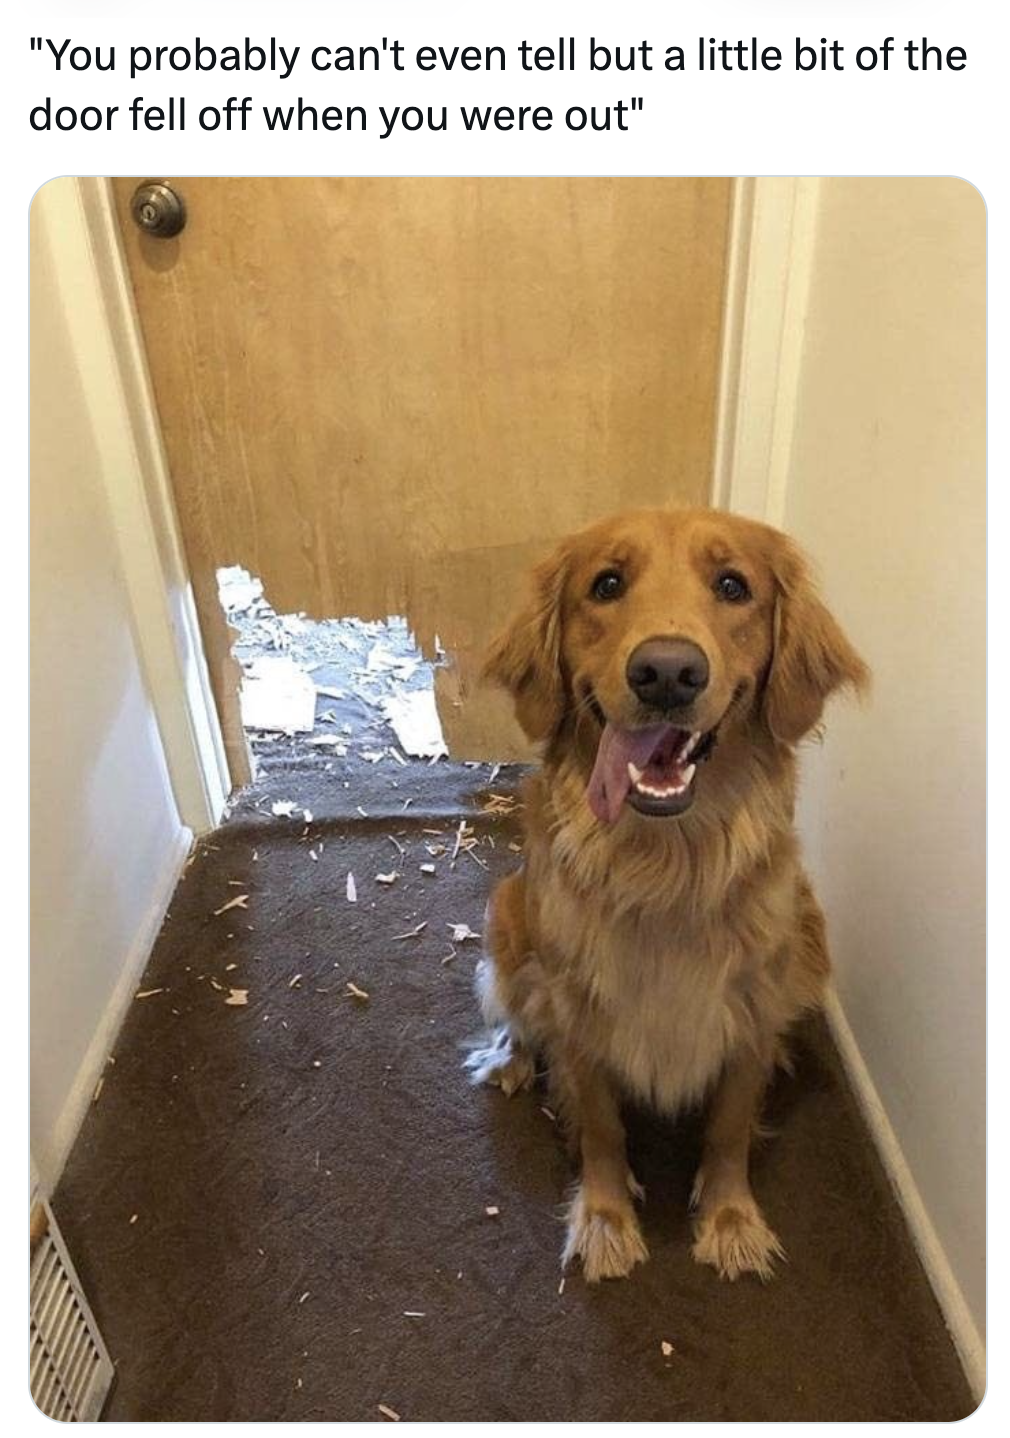 golden retriever - "You probably can't even tell but a little bit of the door fell off when you were out"